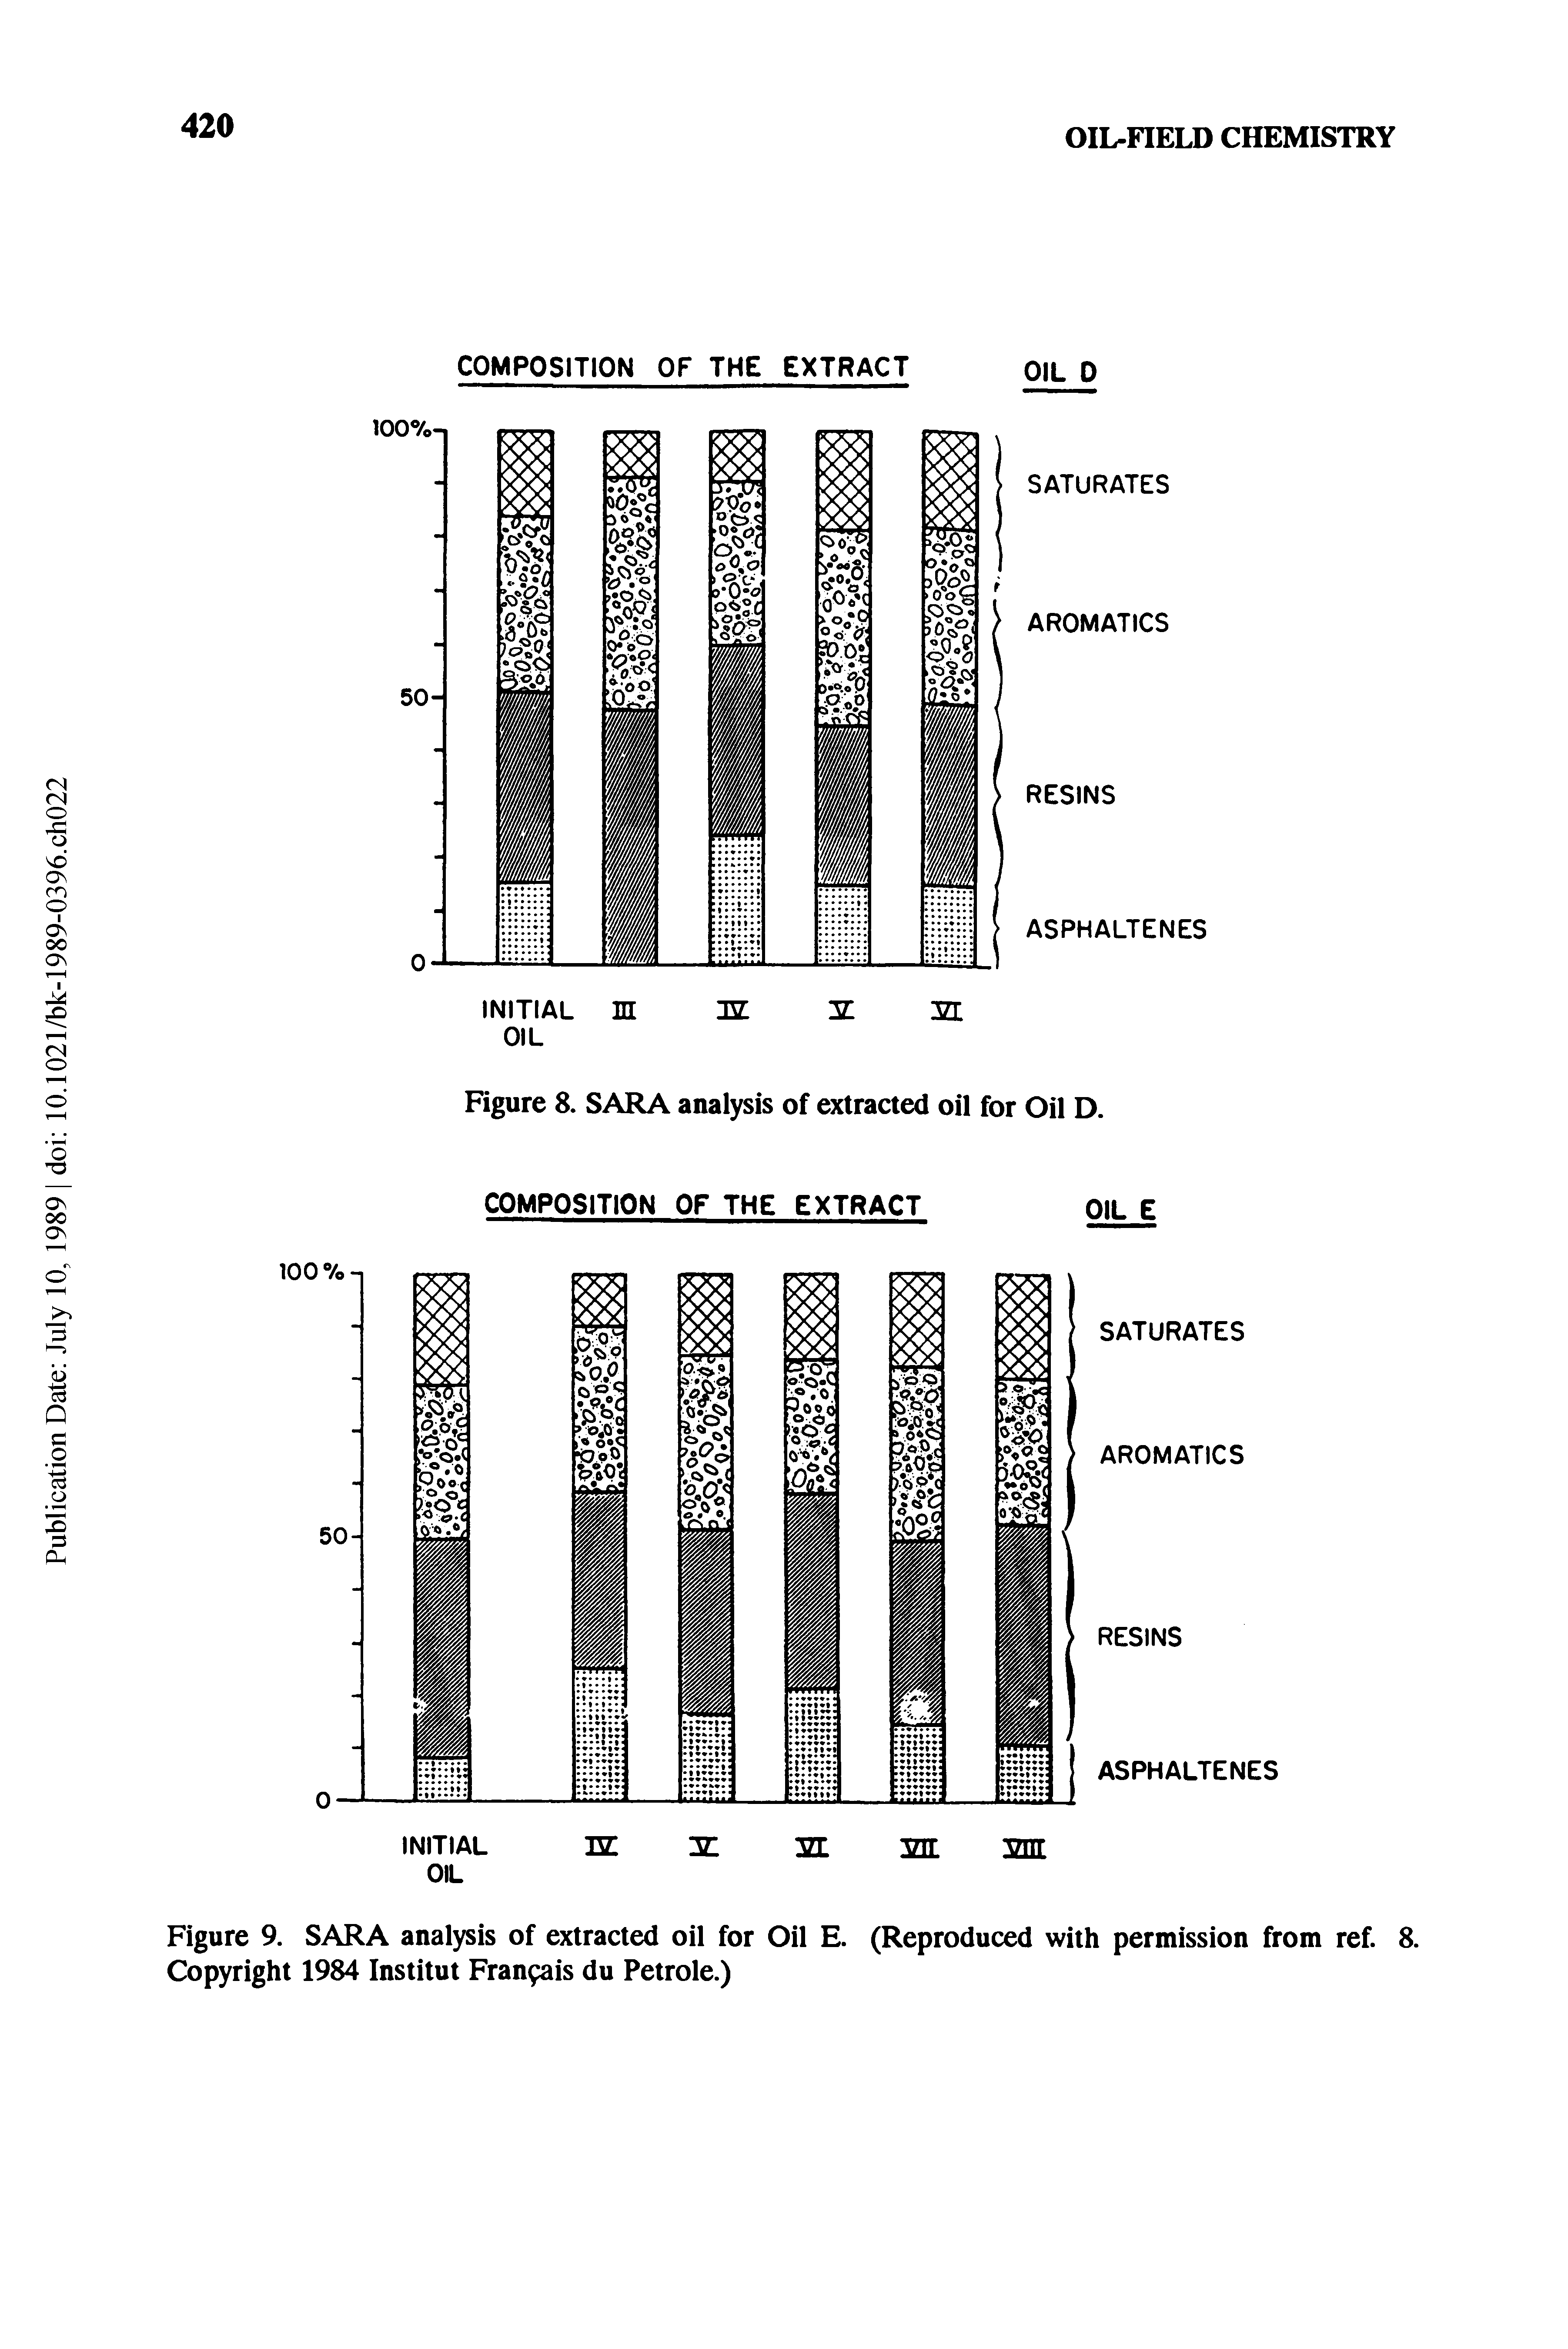 Figure 9. SARA analysis of extracted oil for Oil E. (Reproduced with permission from ref. 8. Copyright 1984 Institut Fran9ais du Petrole.)...